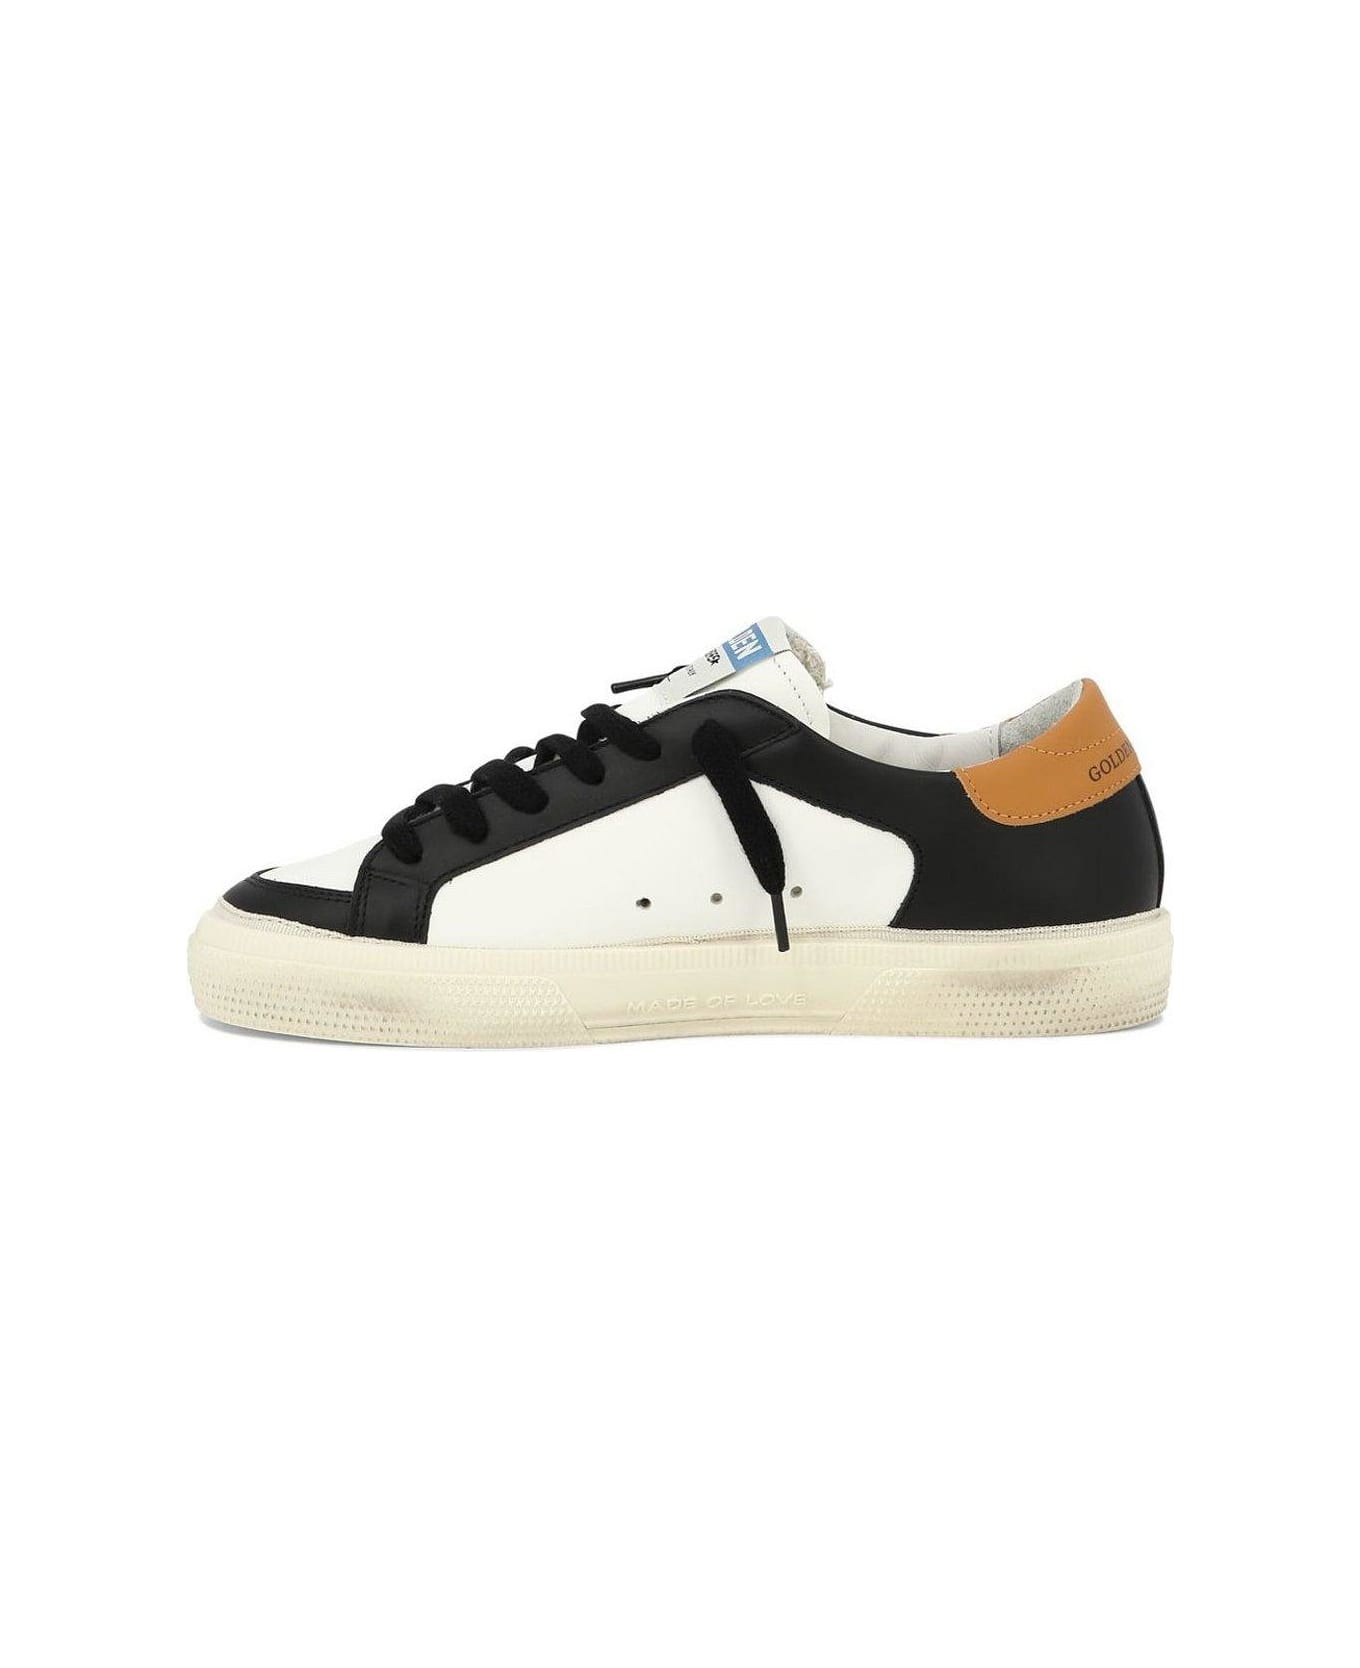 Golden Goose May Star-patch Lace-up Sneakers - White/Black/Orange シューズ